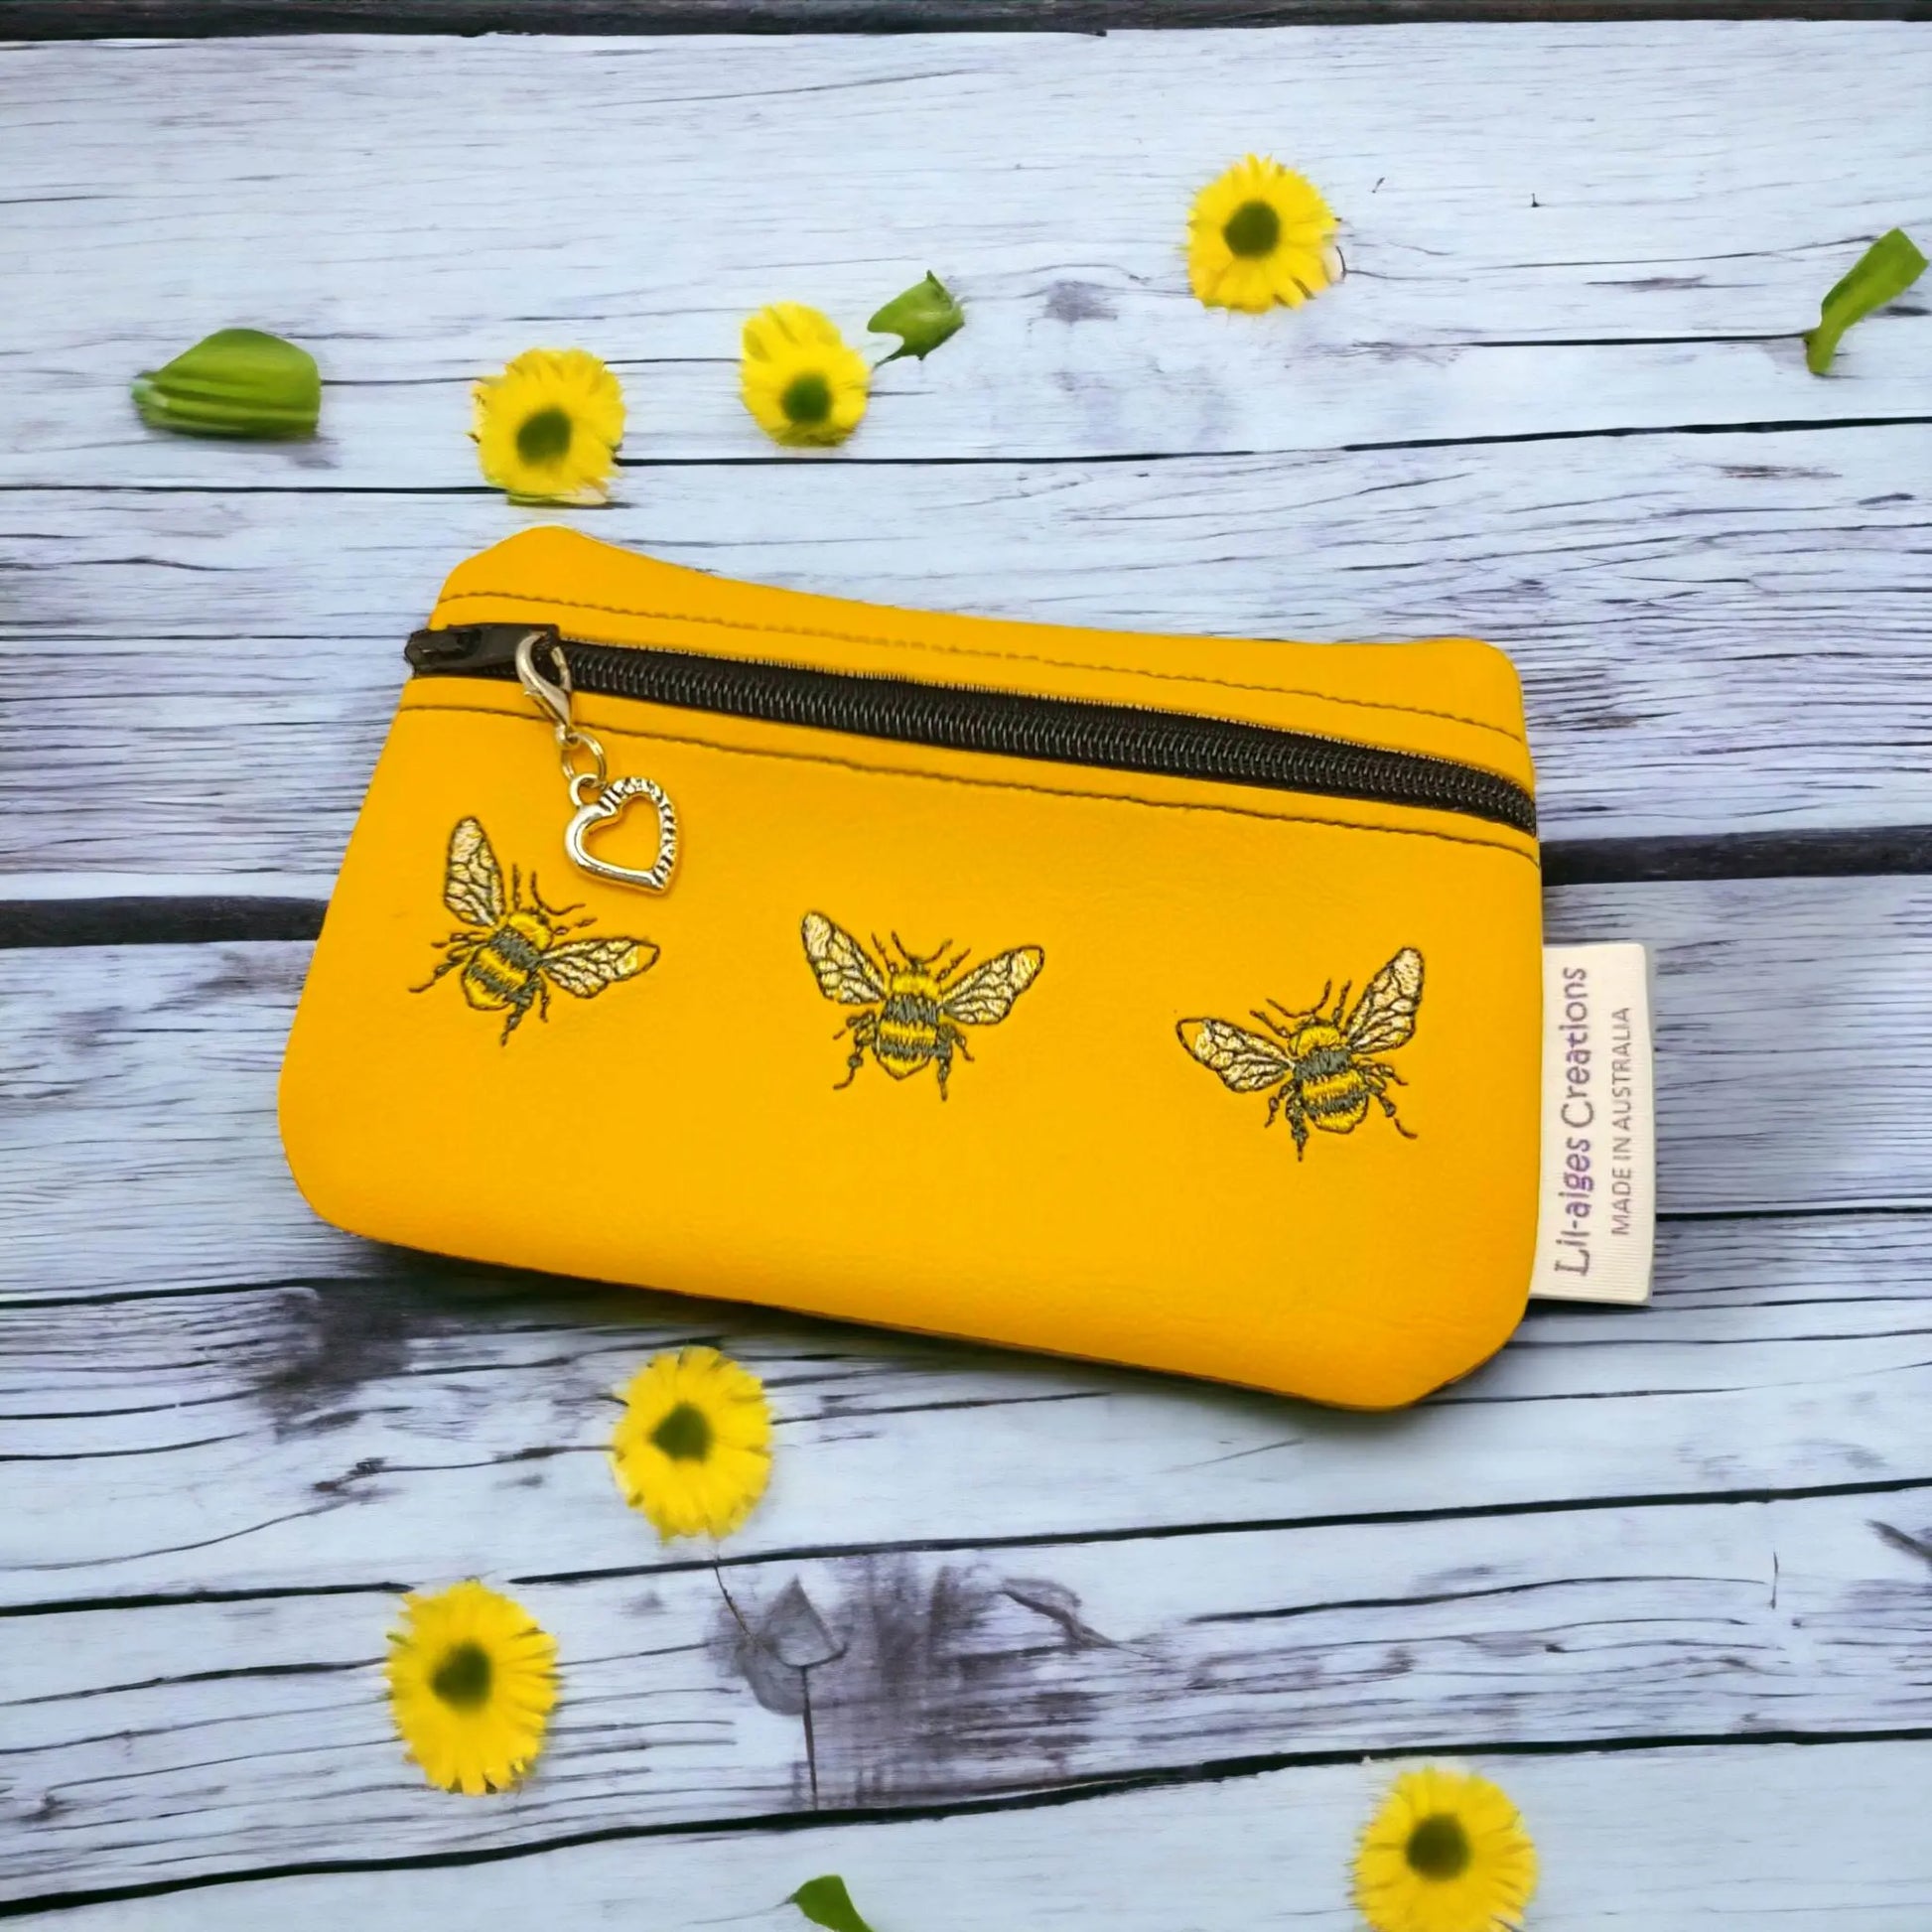 Copy of Bee Themed Gift Pack #1 | Lip Balm Holder, Coin Purse, Keychain | Made in Australia - Image #3